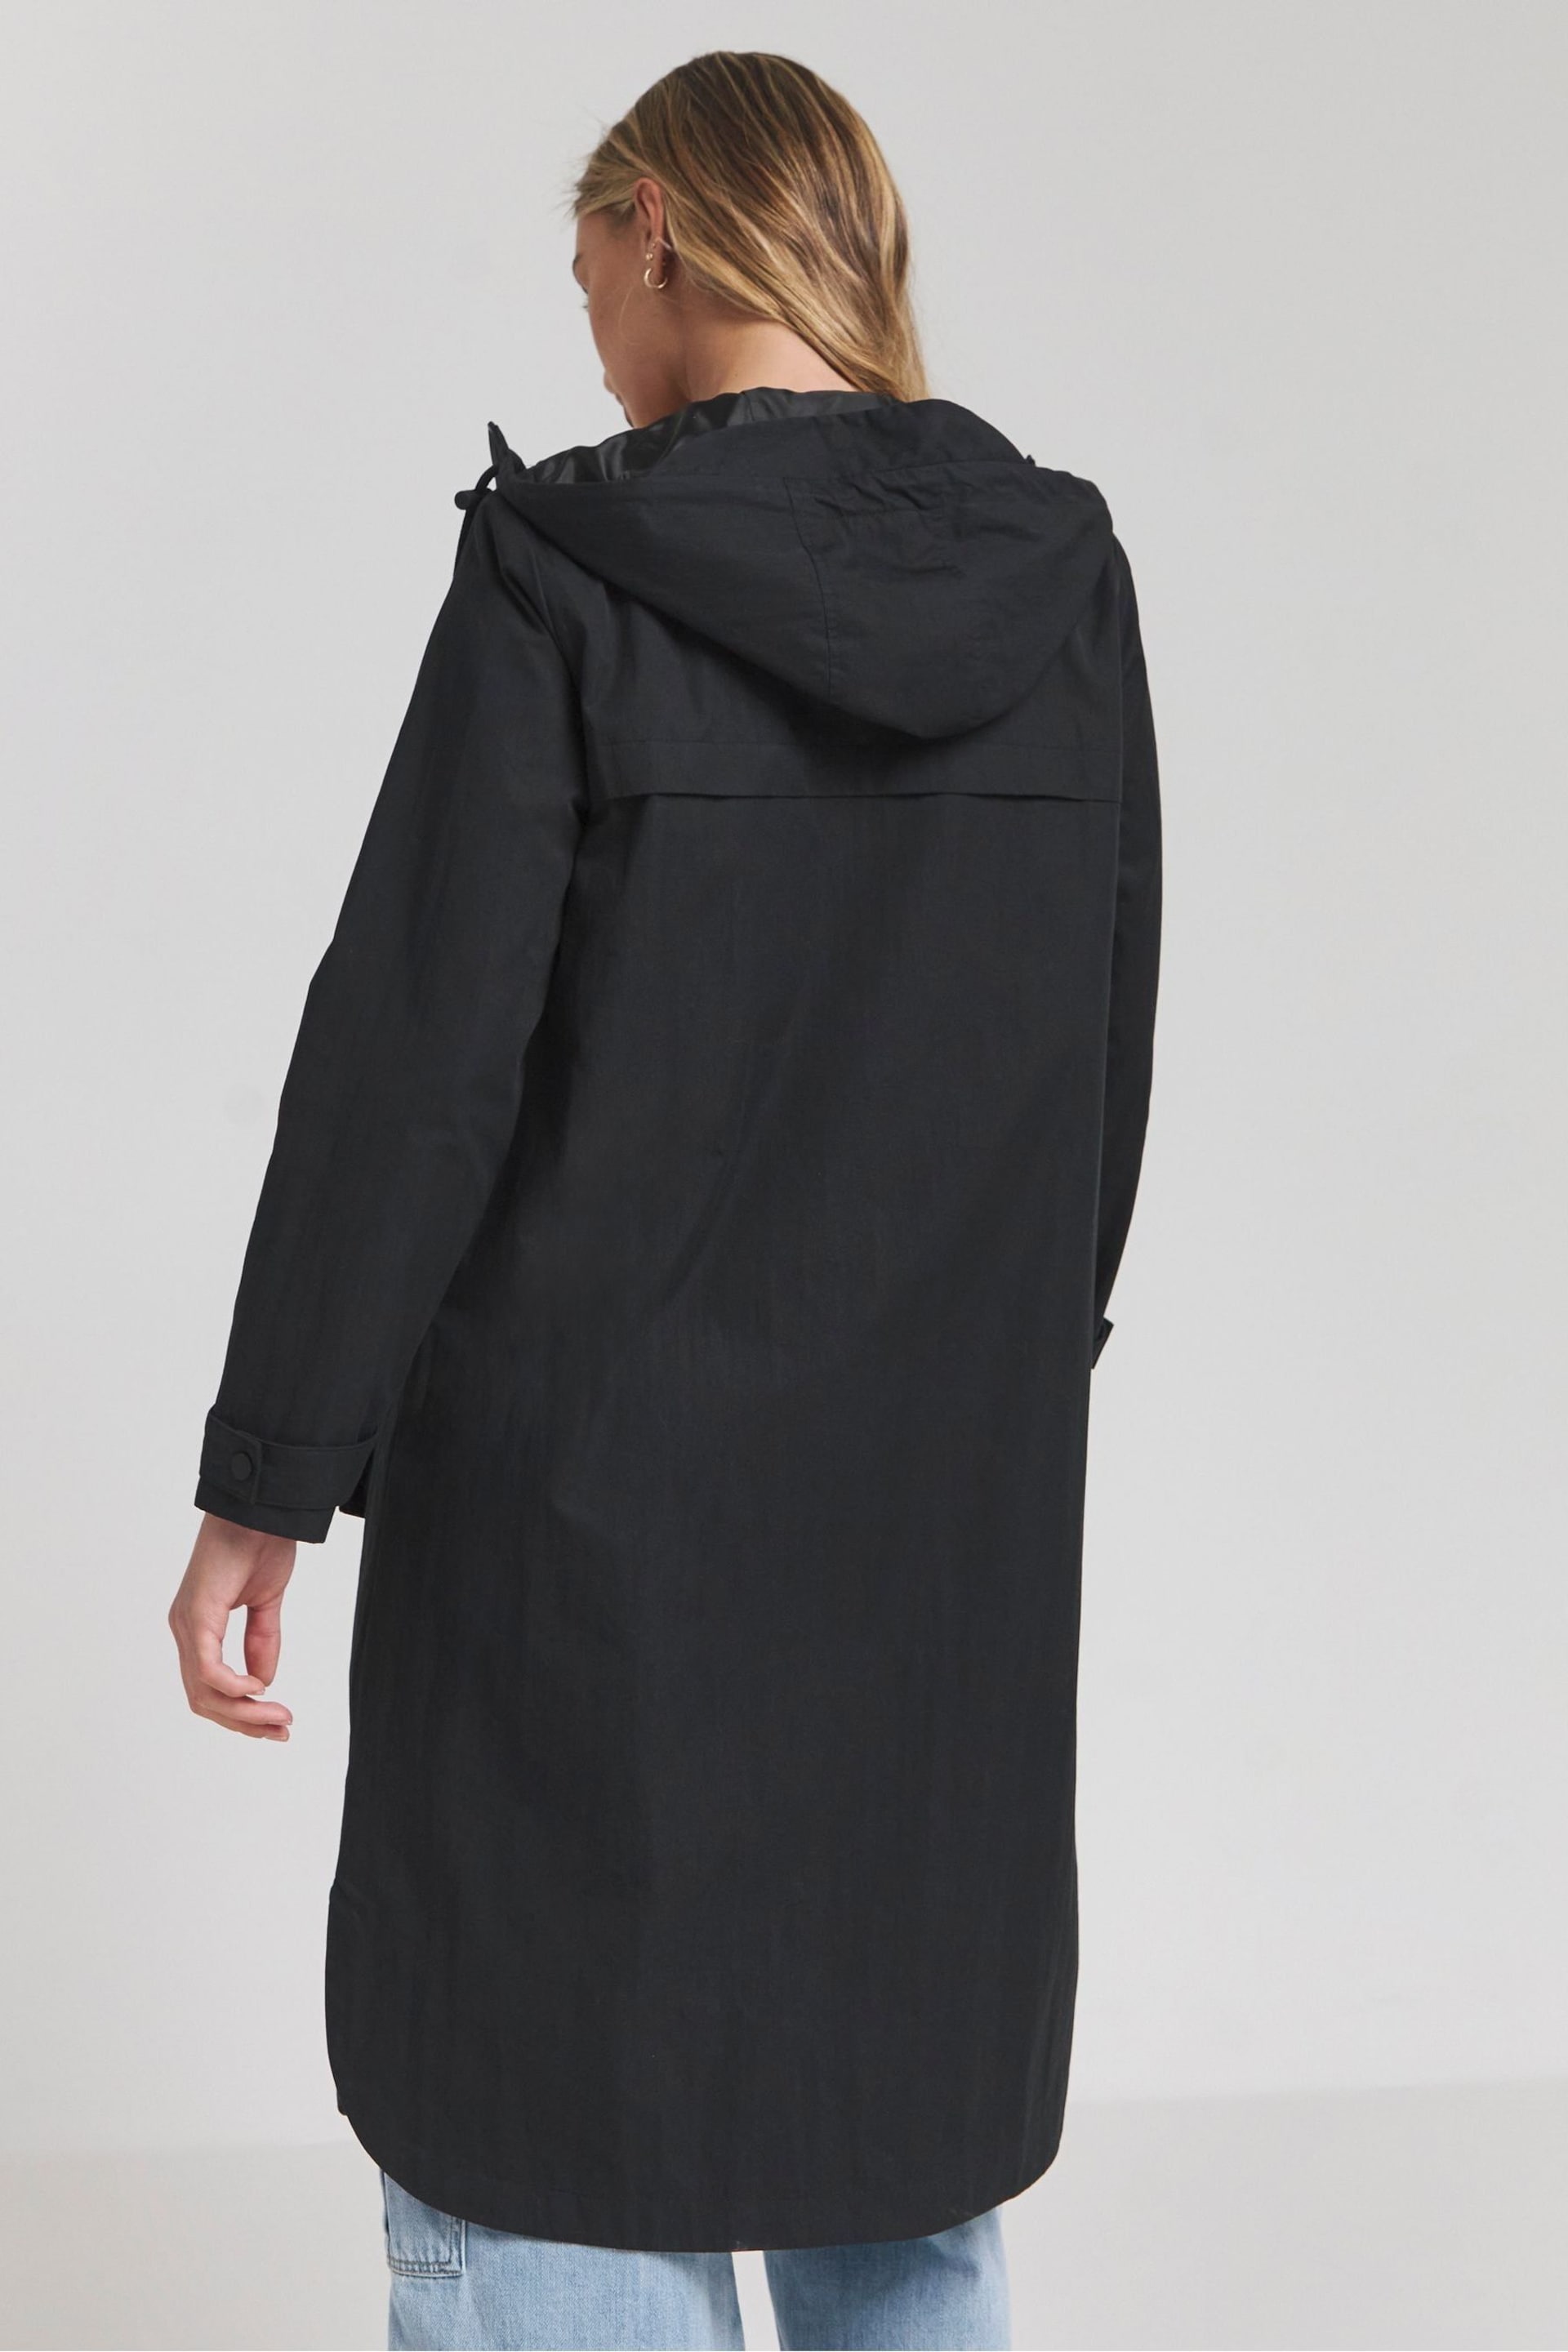 Simply Be Black Functional Utility Coat - Image 3 of 4